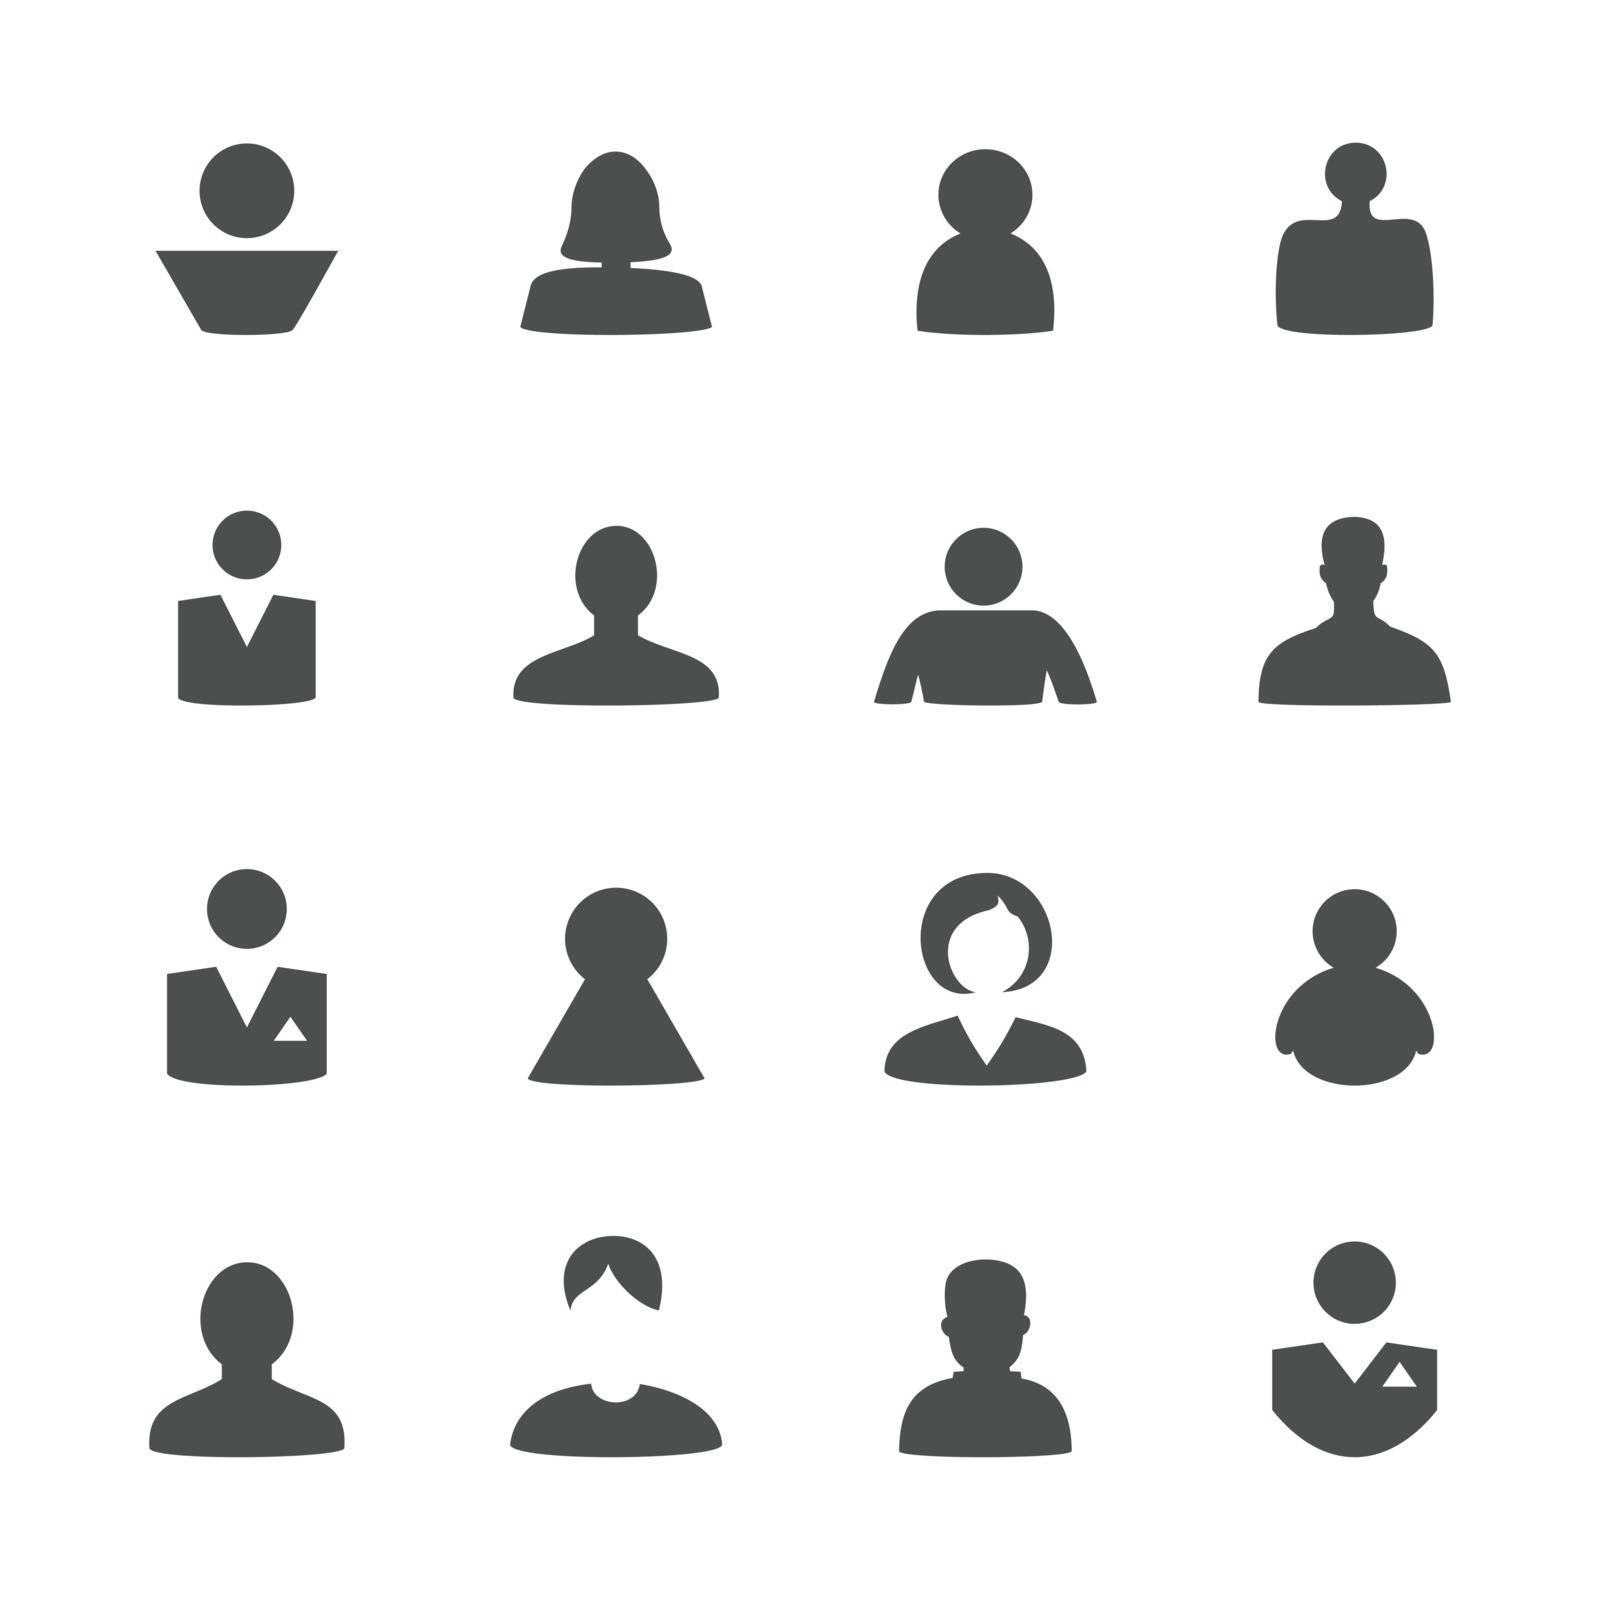 Set of icons on a theme user. A vector illustration